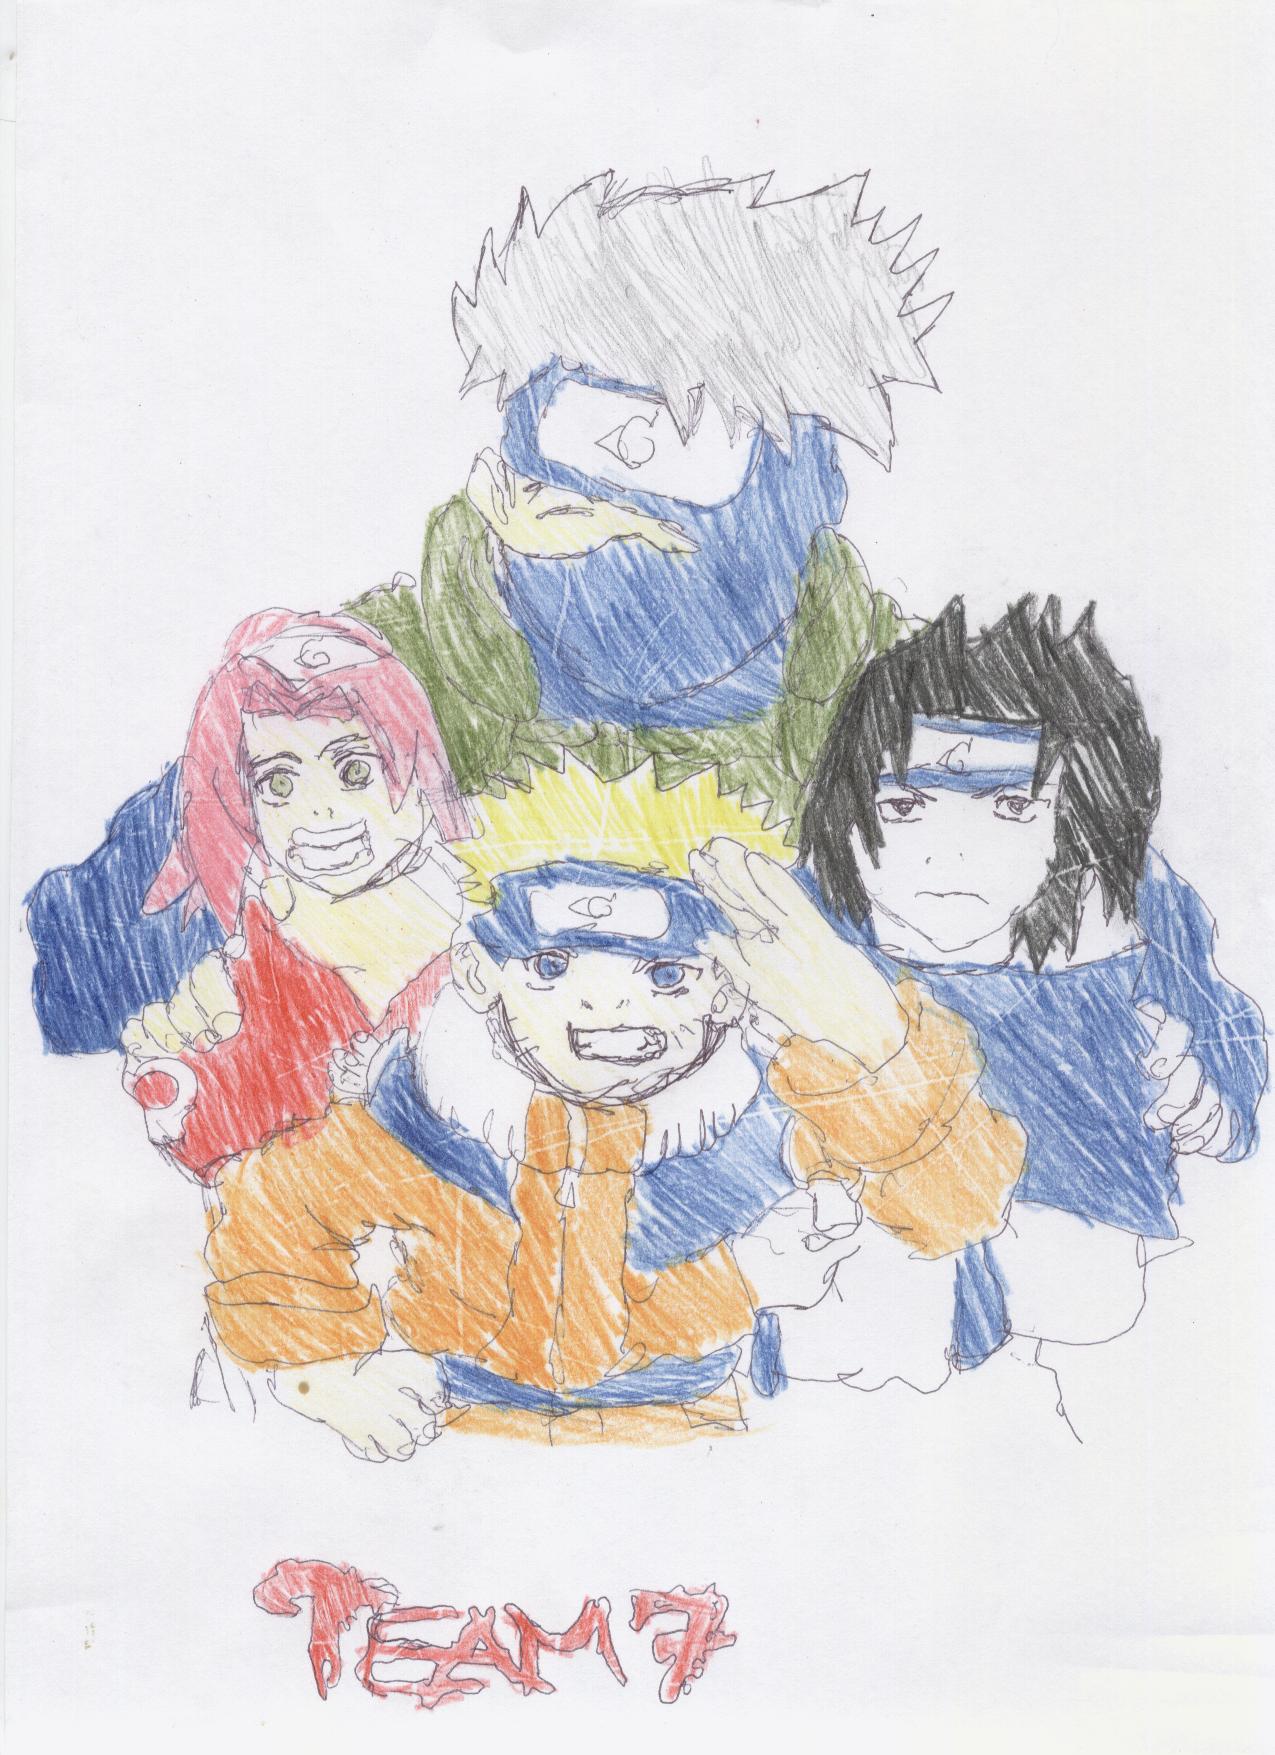 team 7 for himurakamatari's contest by don